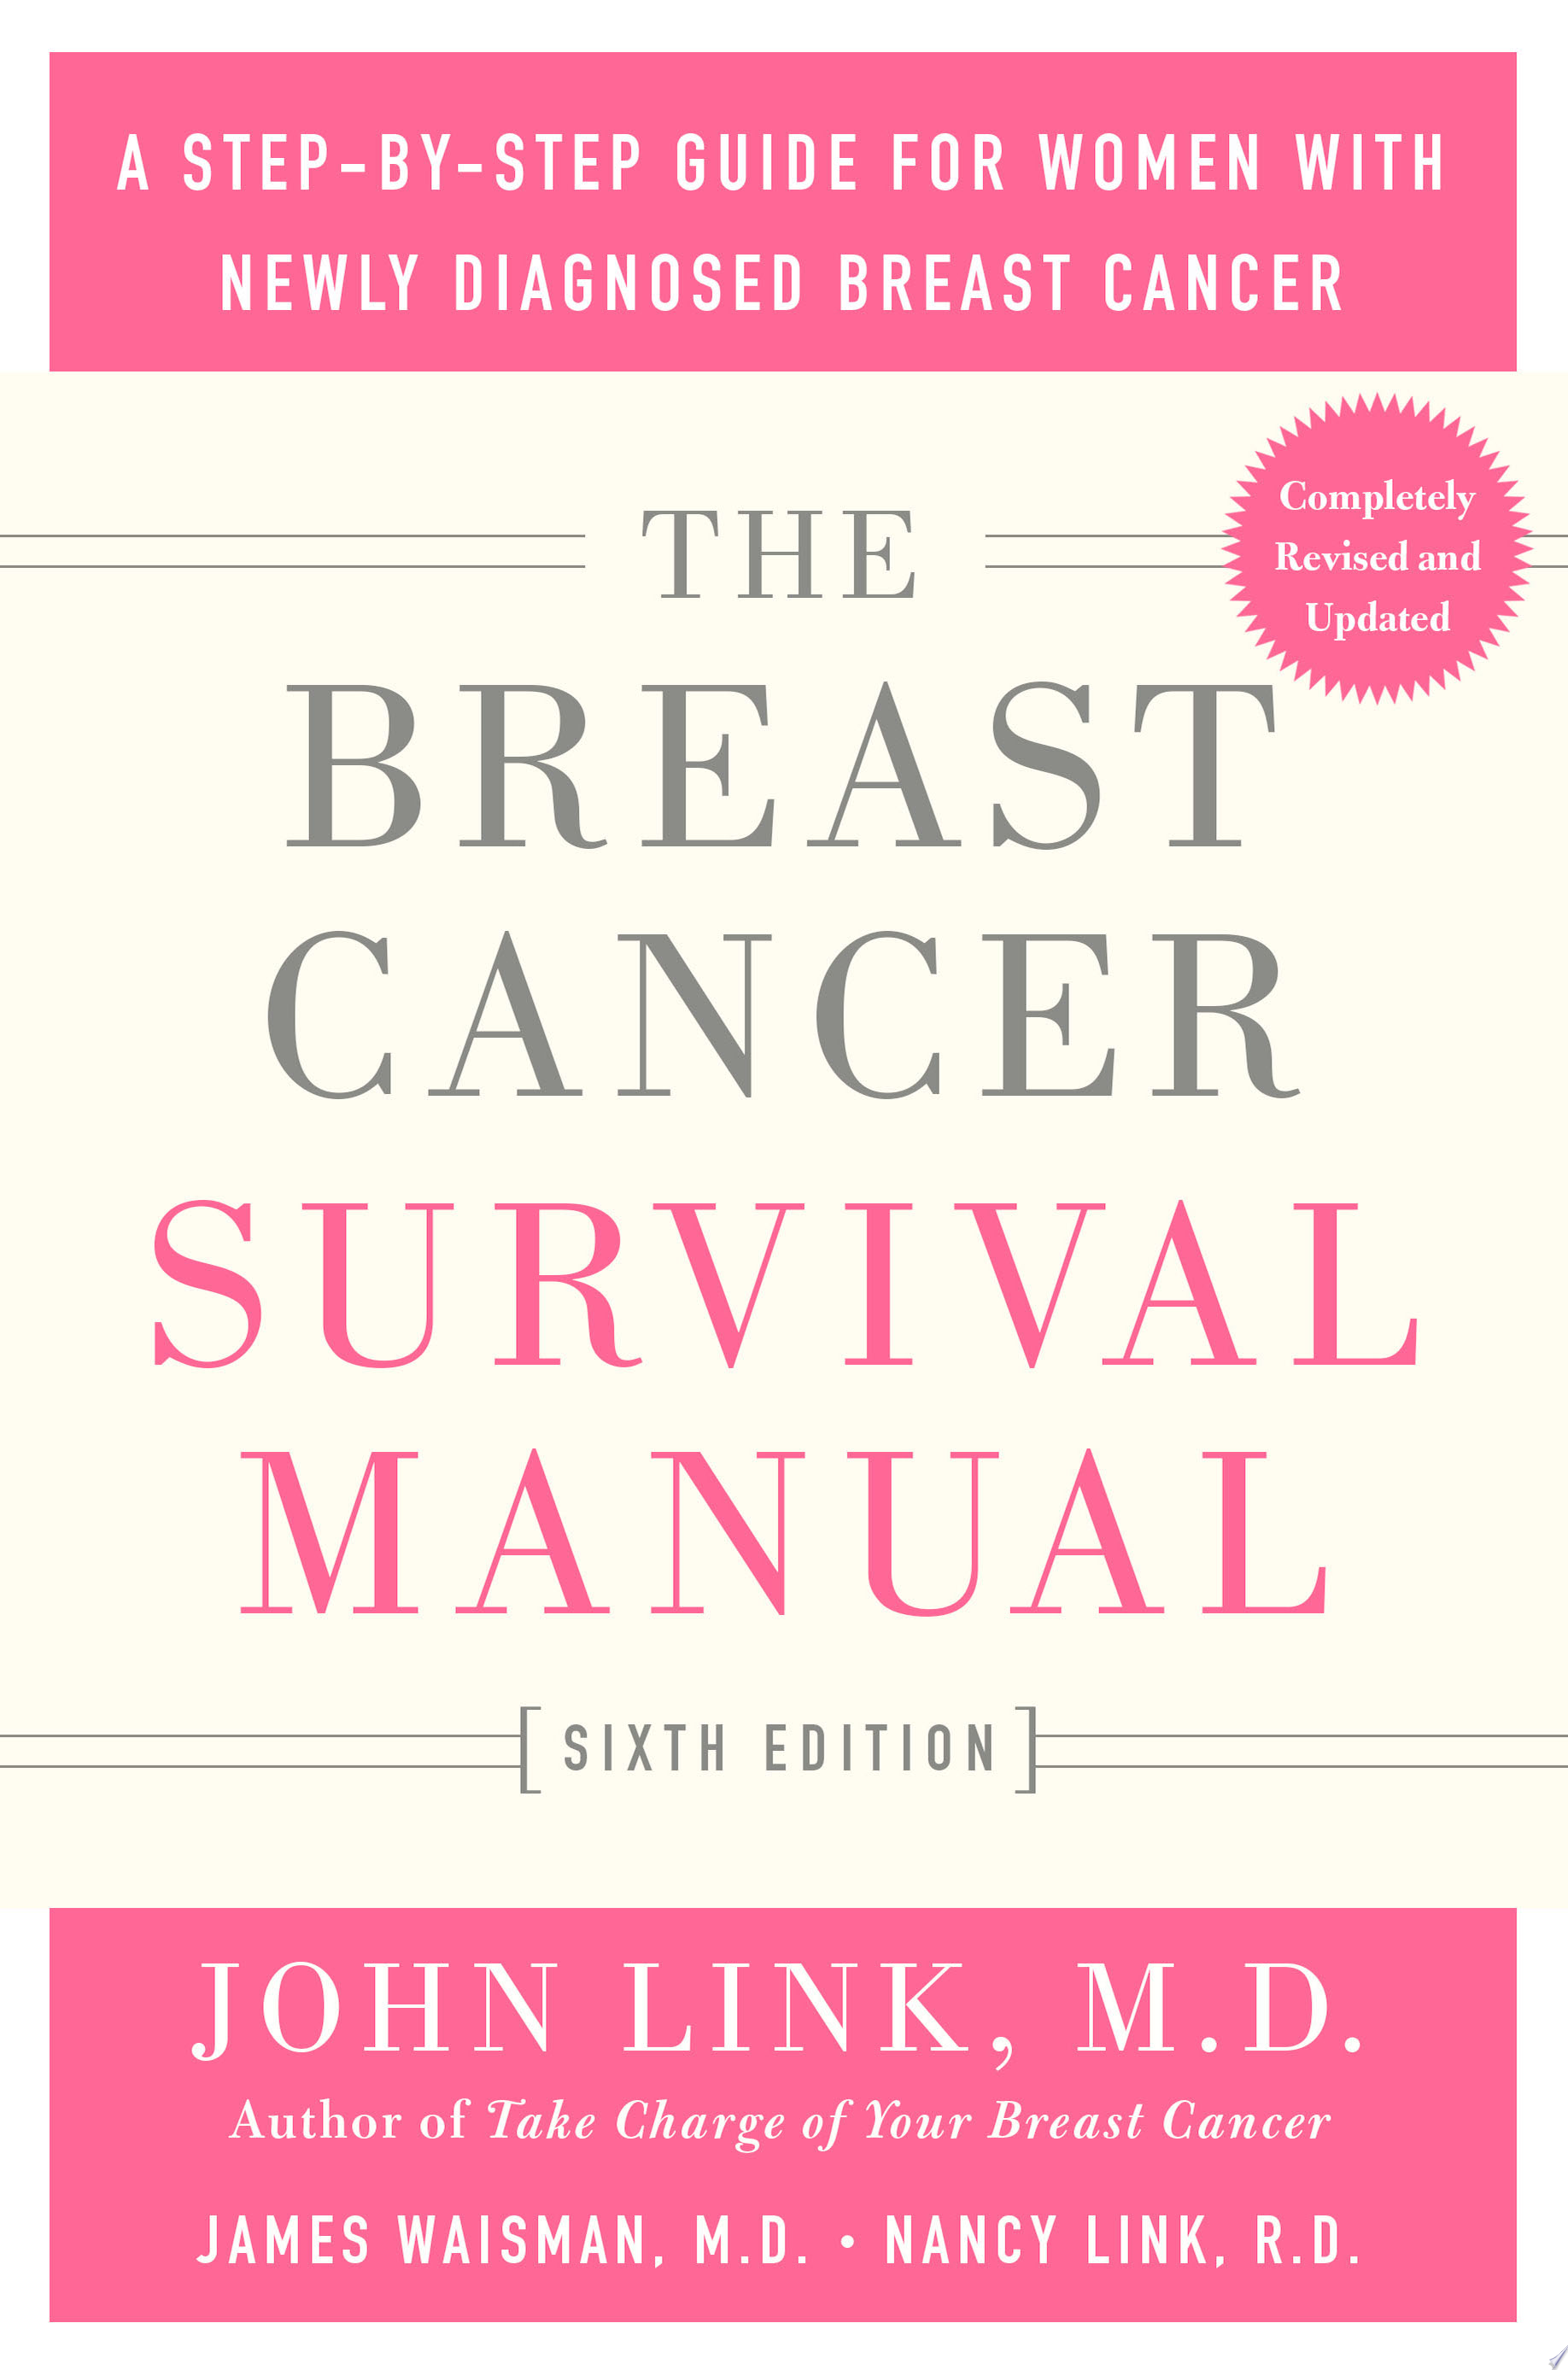 Image for "The Breast Cancer Survival Manual"